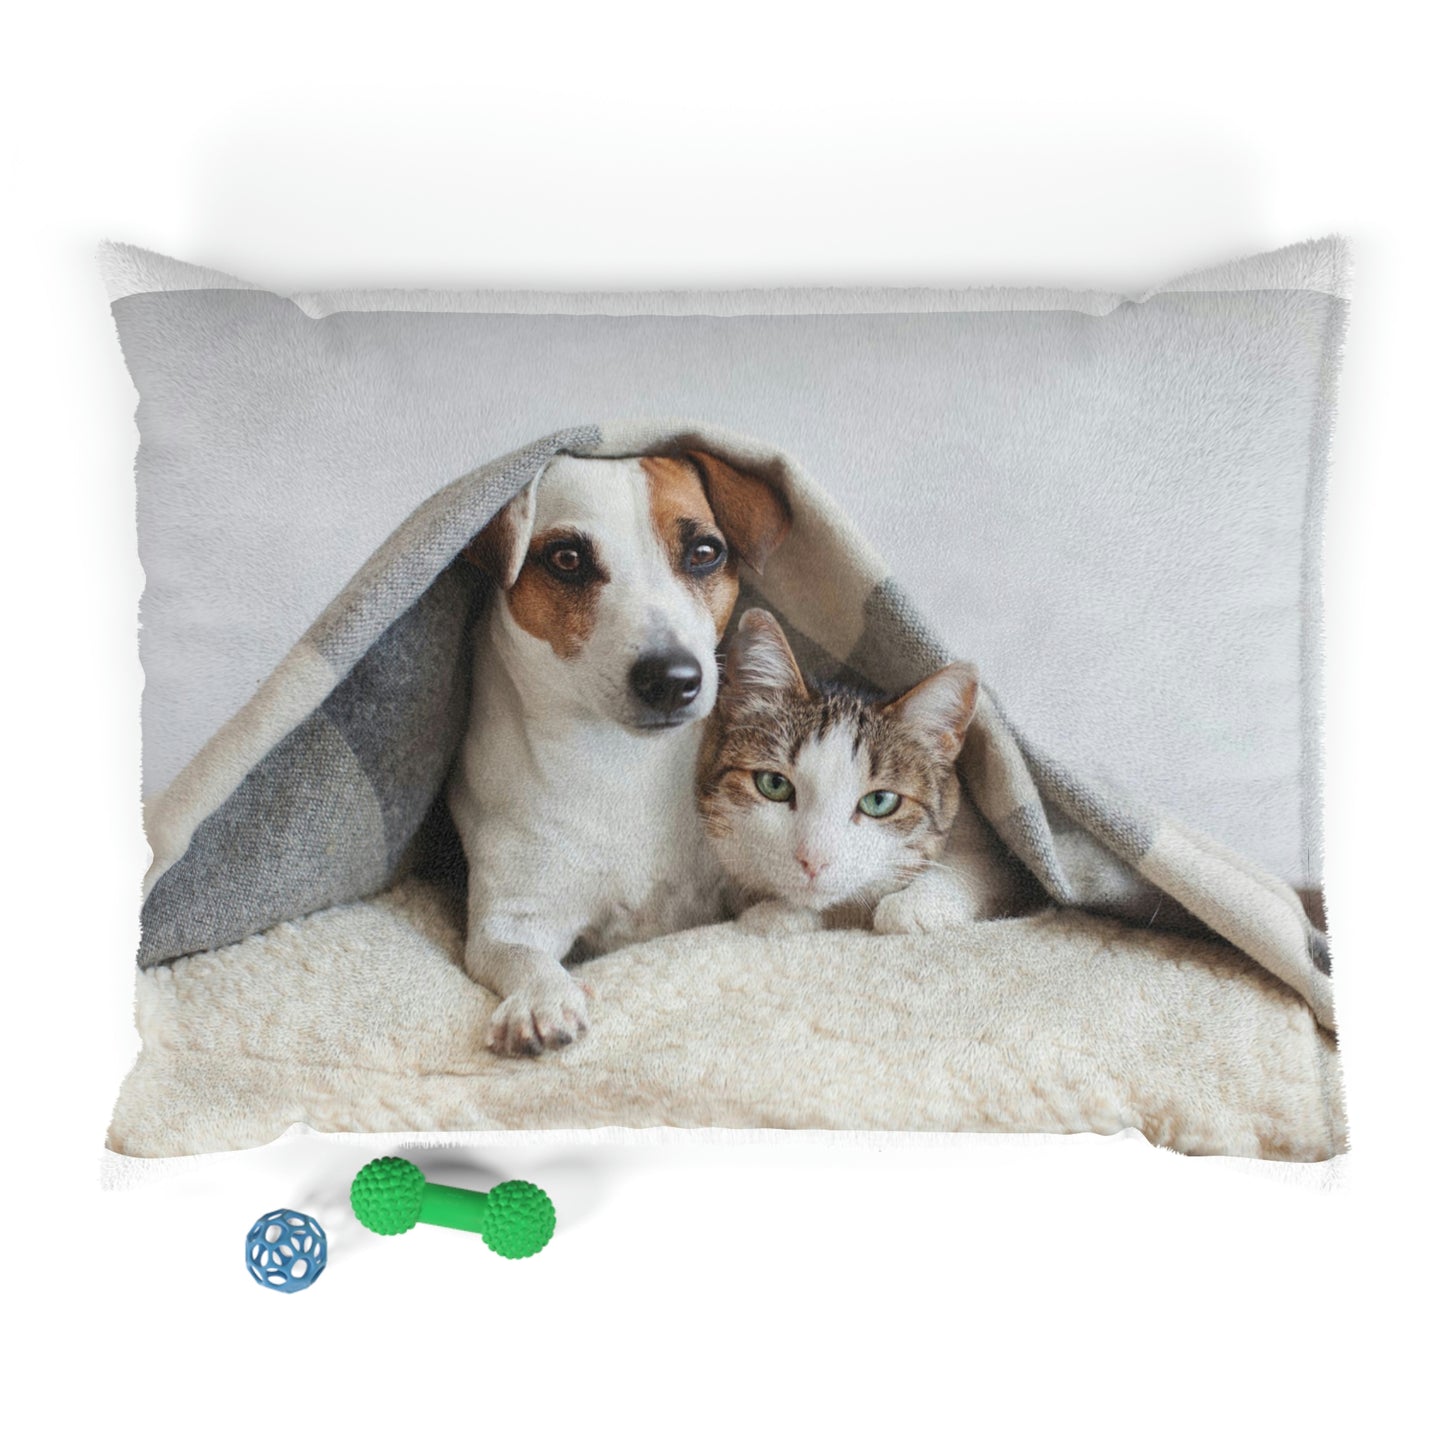 Customize Your Furry Friend's Comfort with Our Personalized Suede Dog Bed - Available in Different Sizes for Both Large and Small Pets, with Washable Cover and Comfy Pillow.